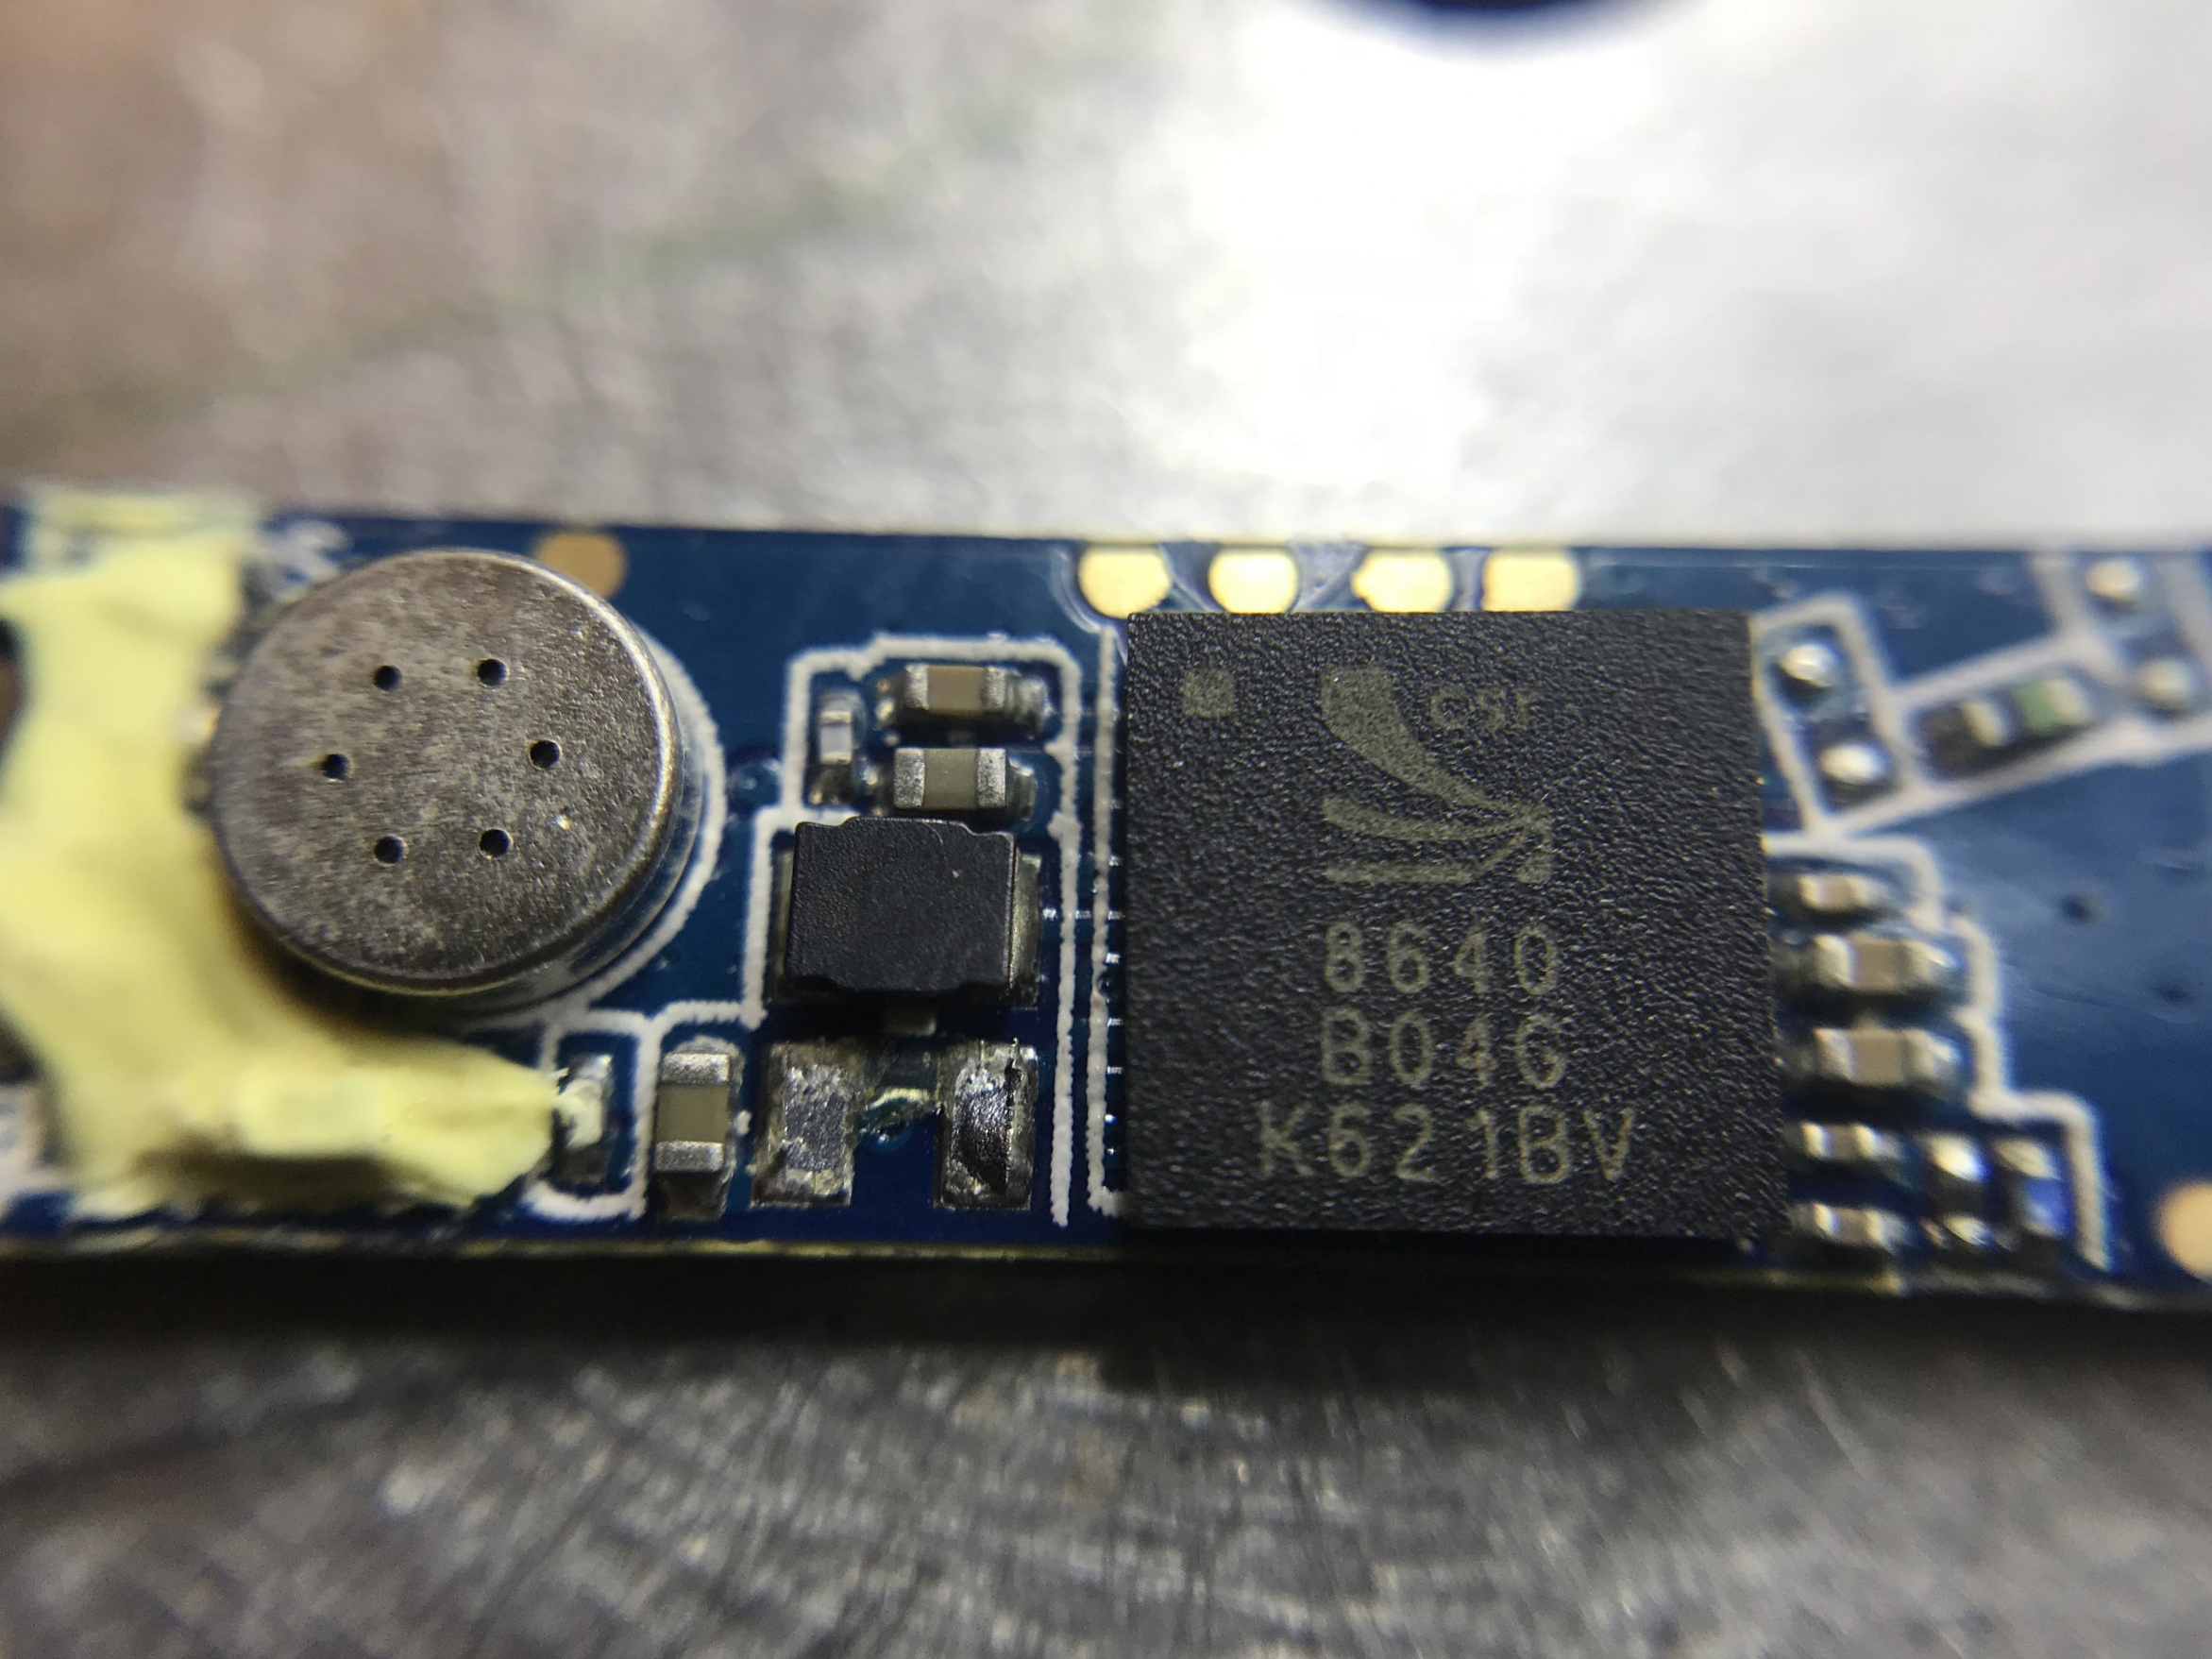  Bluetooth module showing the CSR-8640 and the microphone for talking 